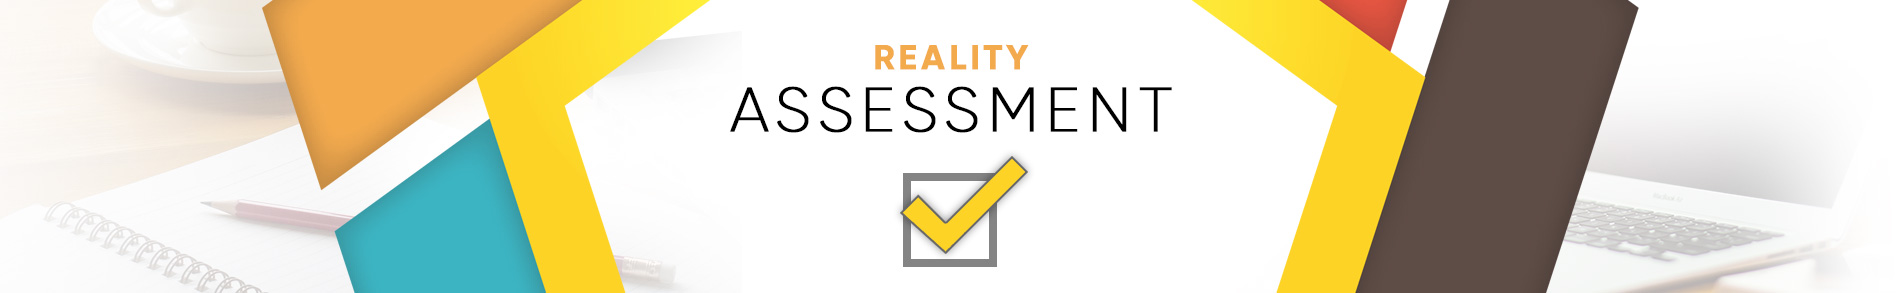 reality-assessment